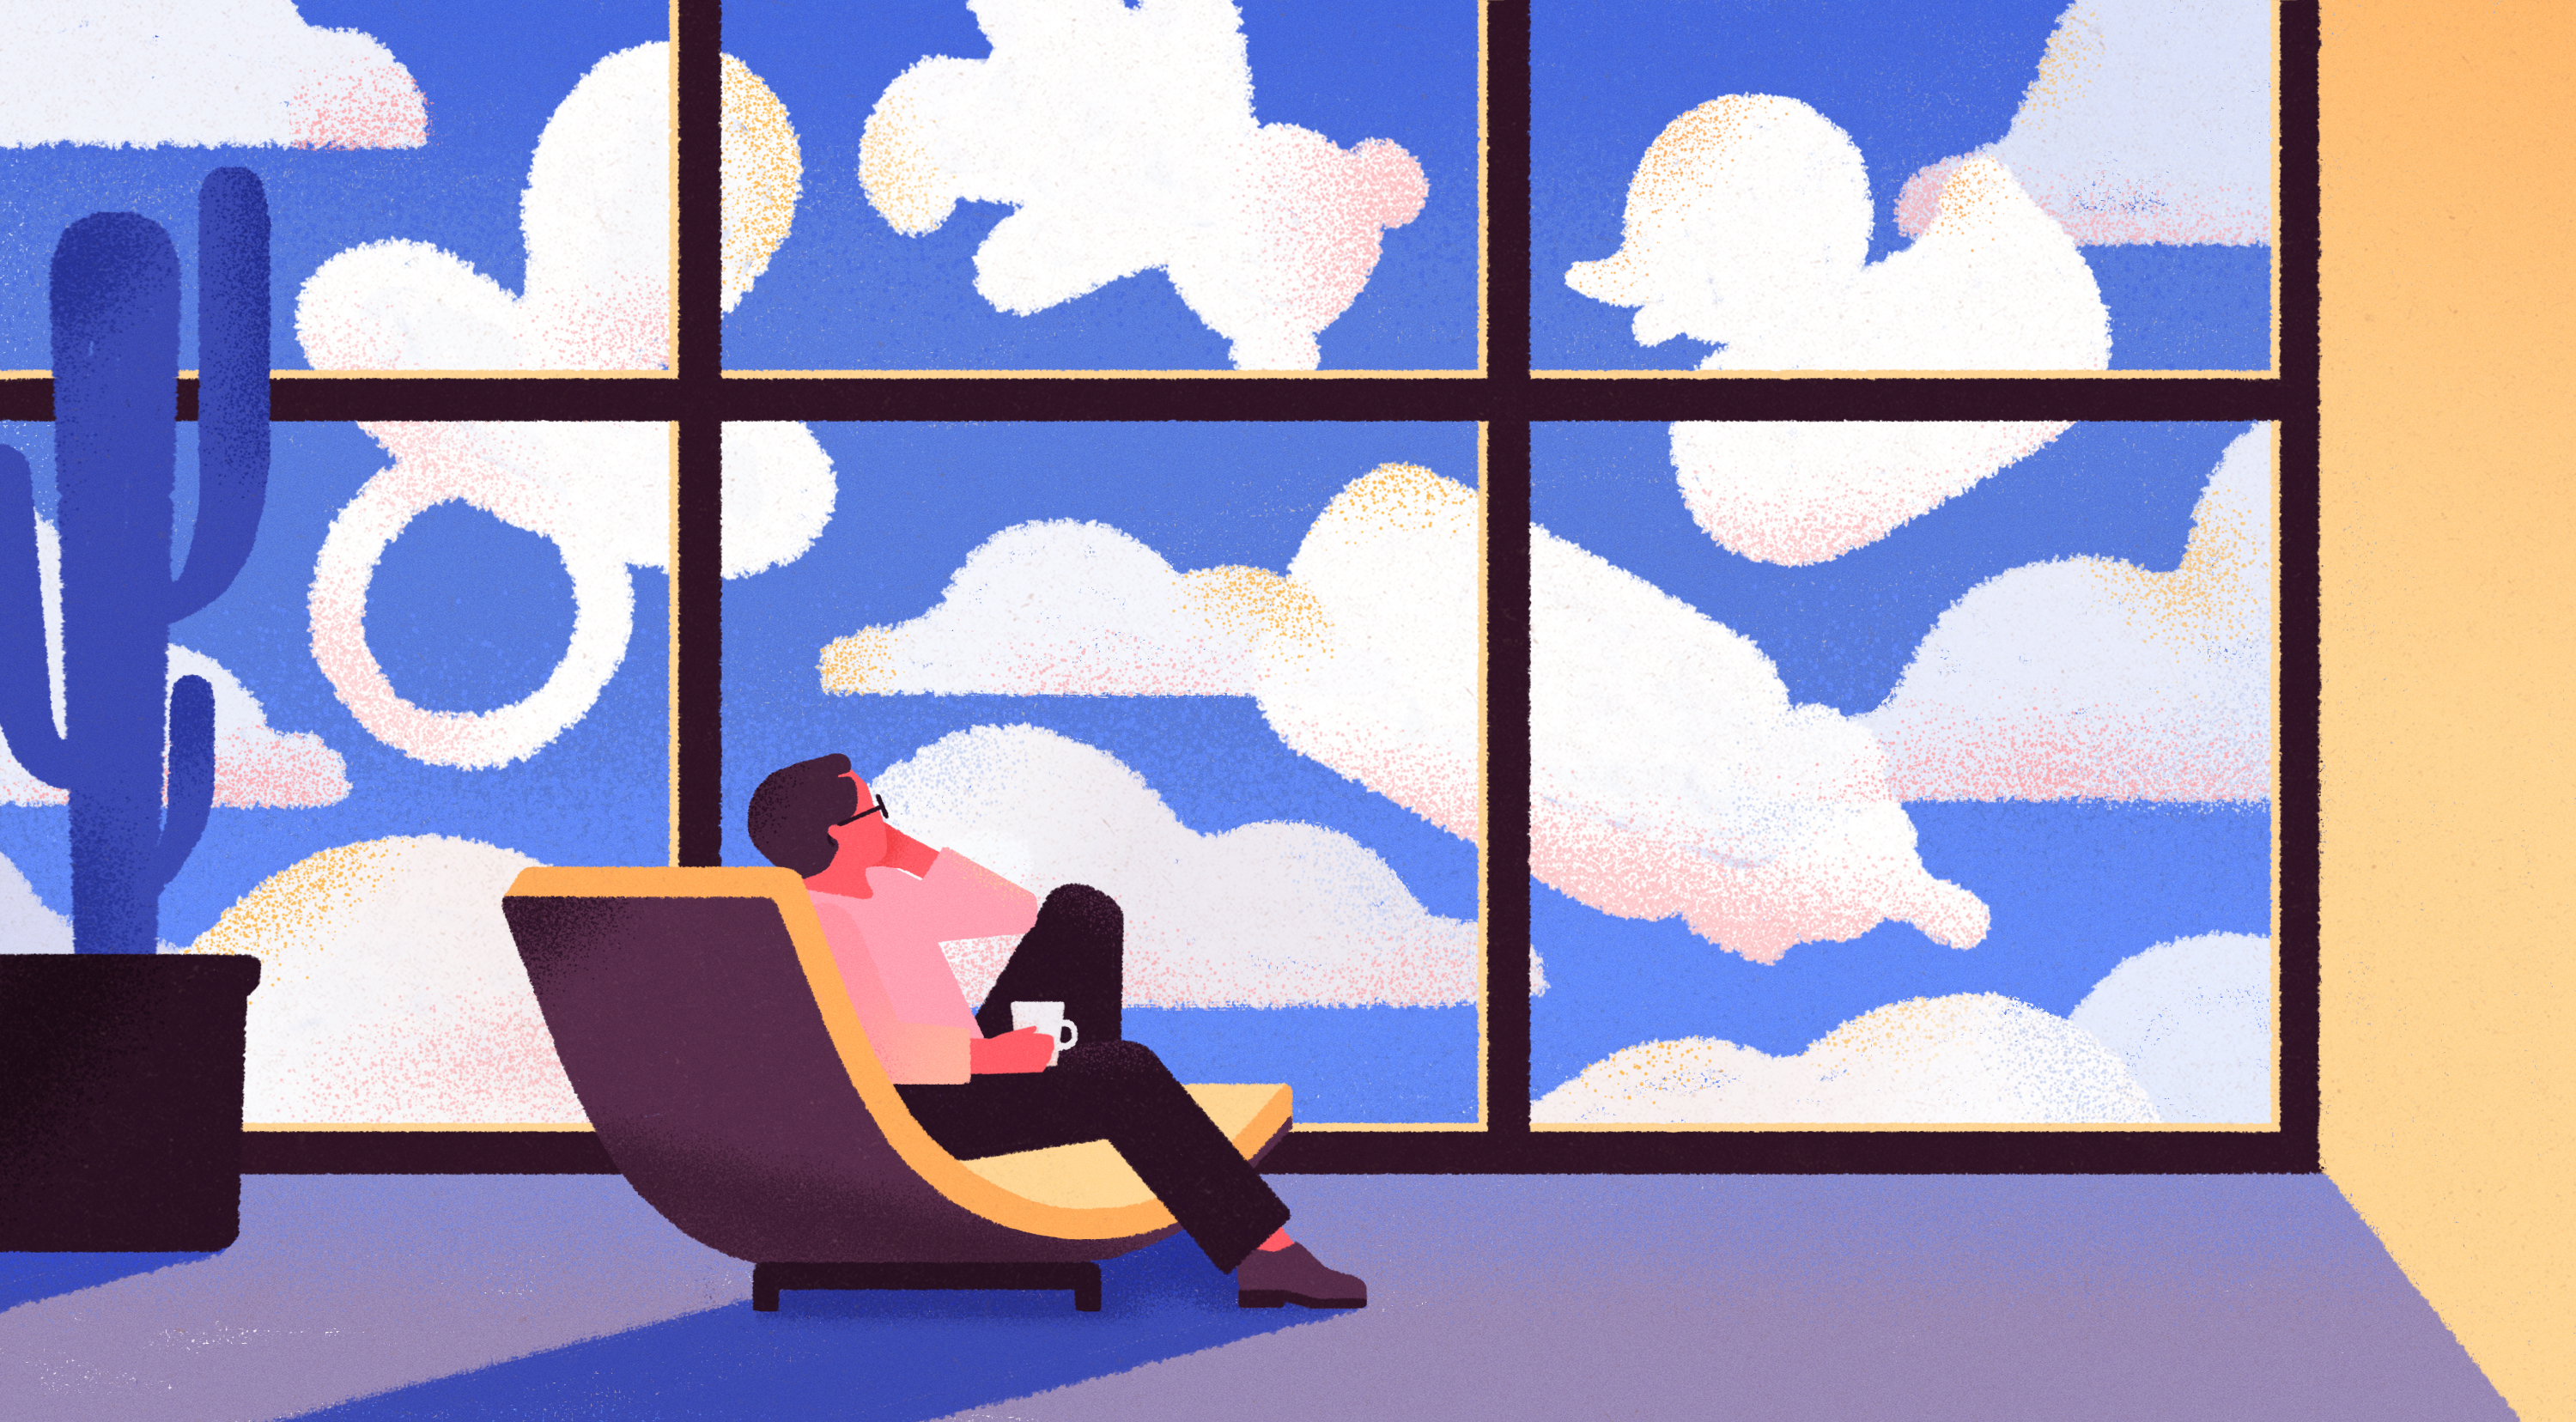 Illustration of a person in a chair looking out the window at clouds in the shapes of a baby bottle, a teddy bear, a pacifier, and a rubber duck.